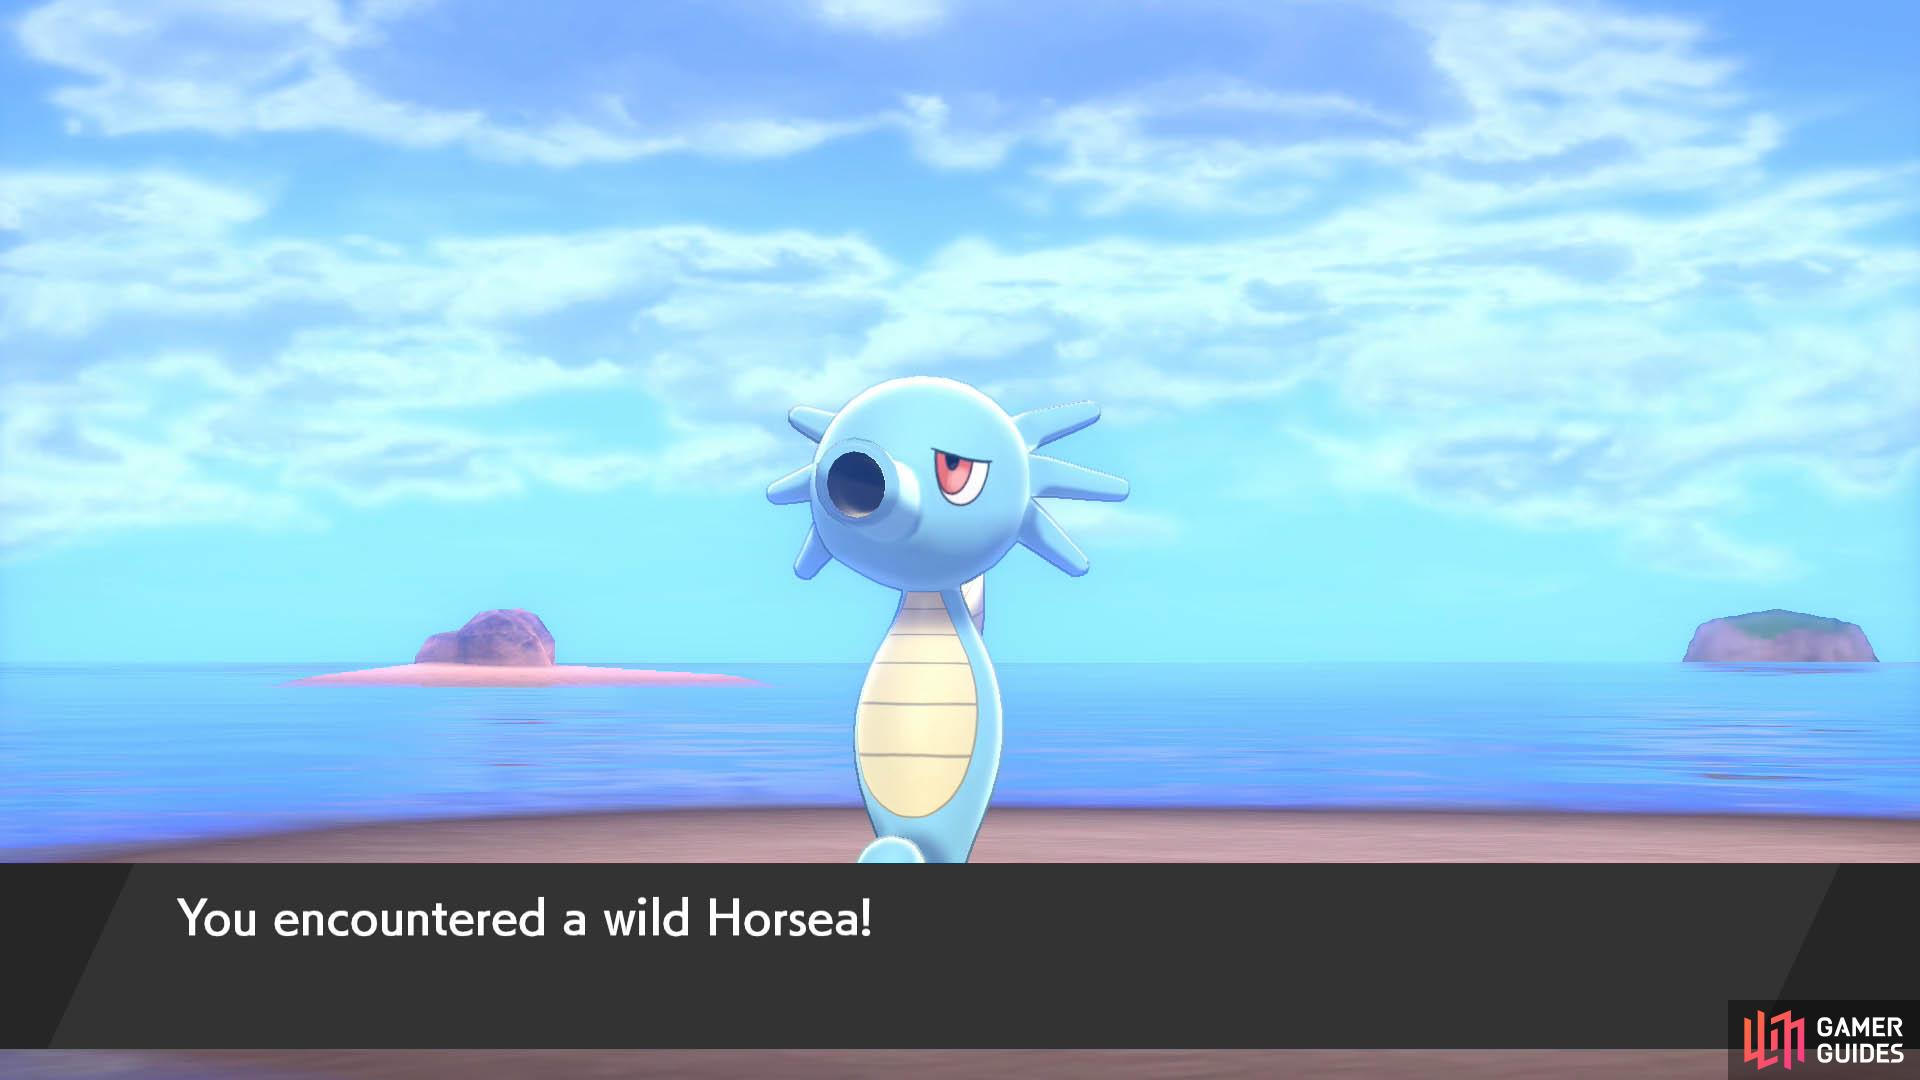 Horsea doesn’t look very impressed here for some reason.